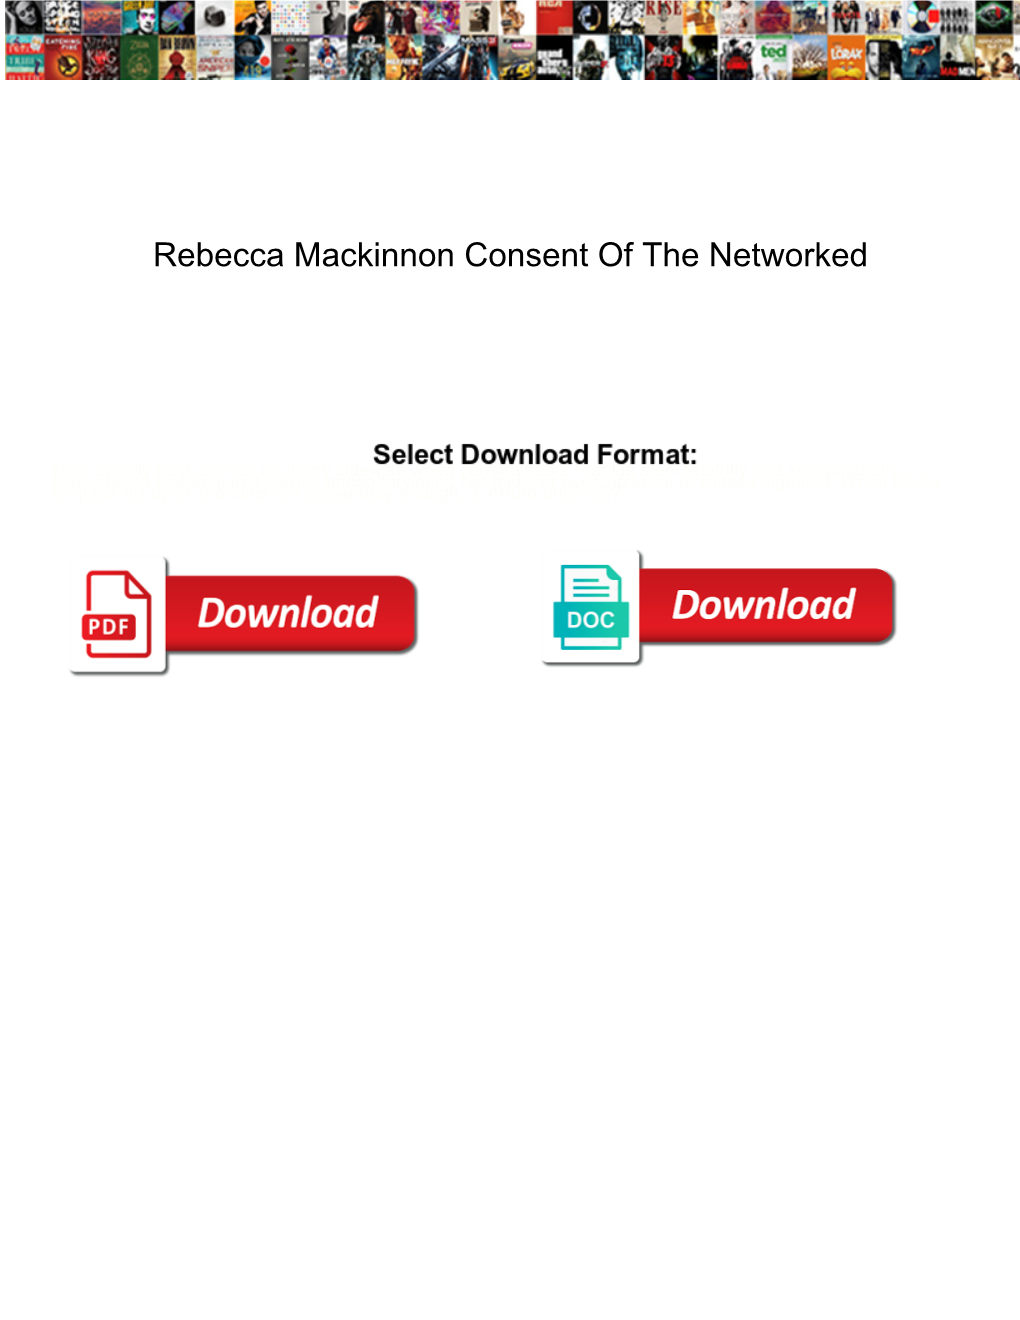 Rebecca Mackinnon Consent of the Networked